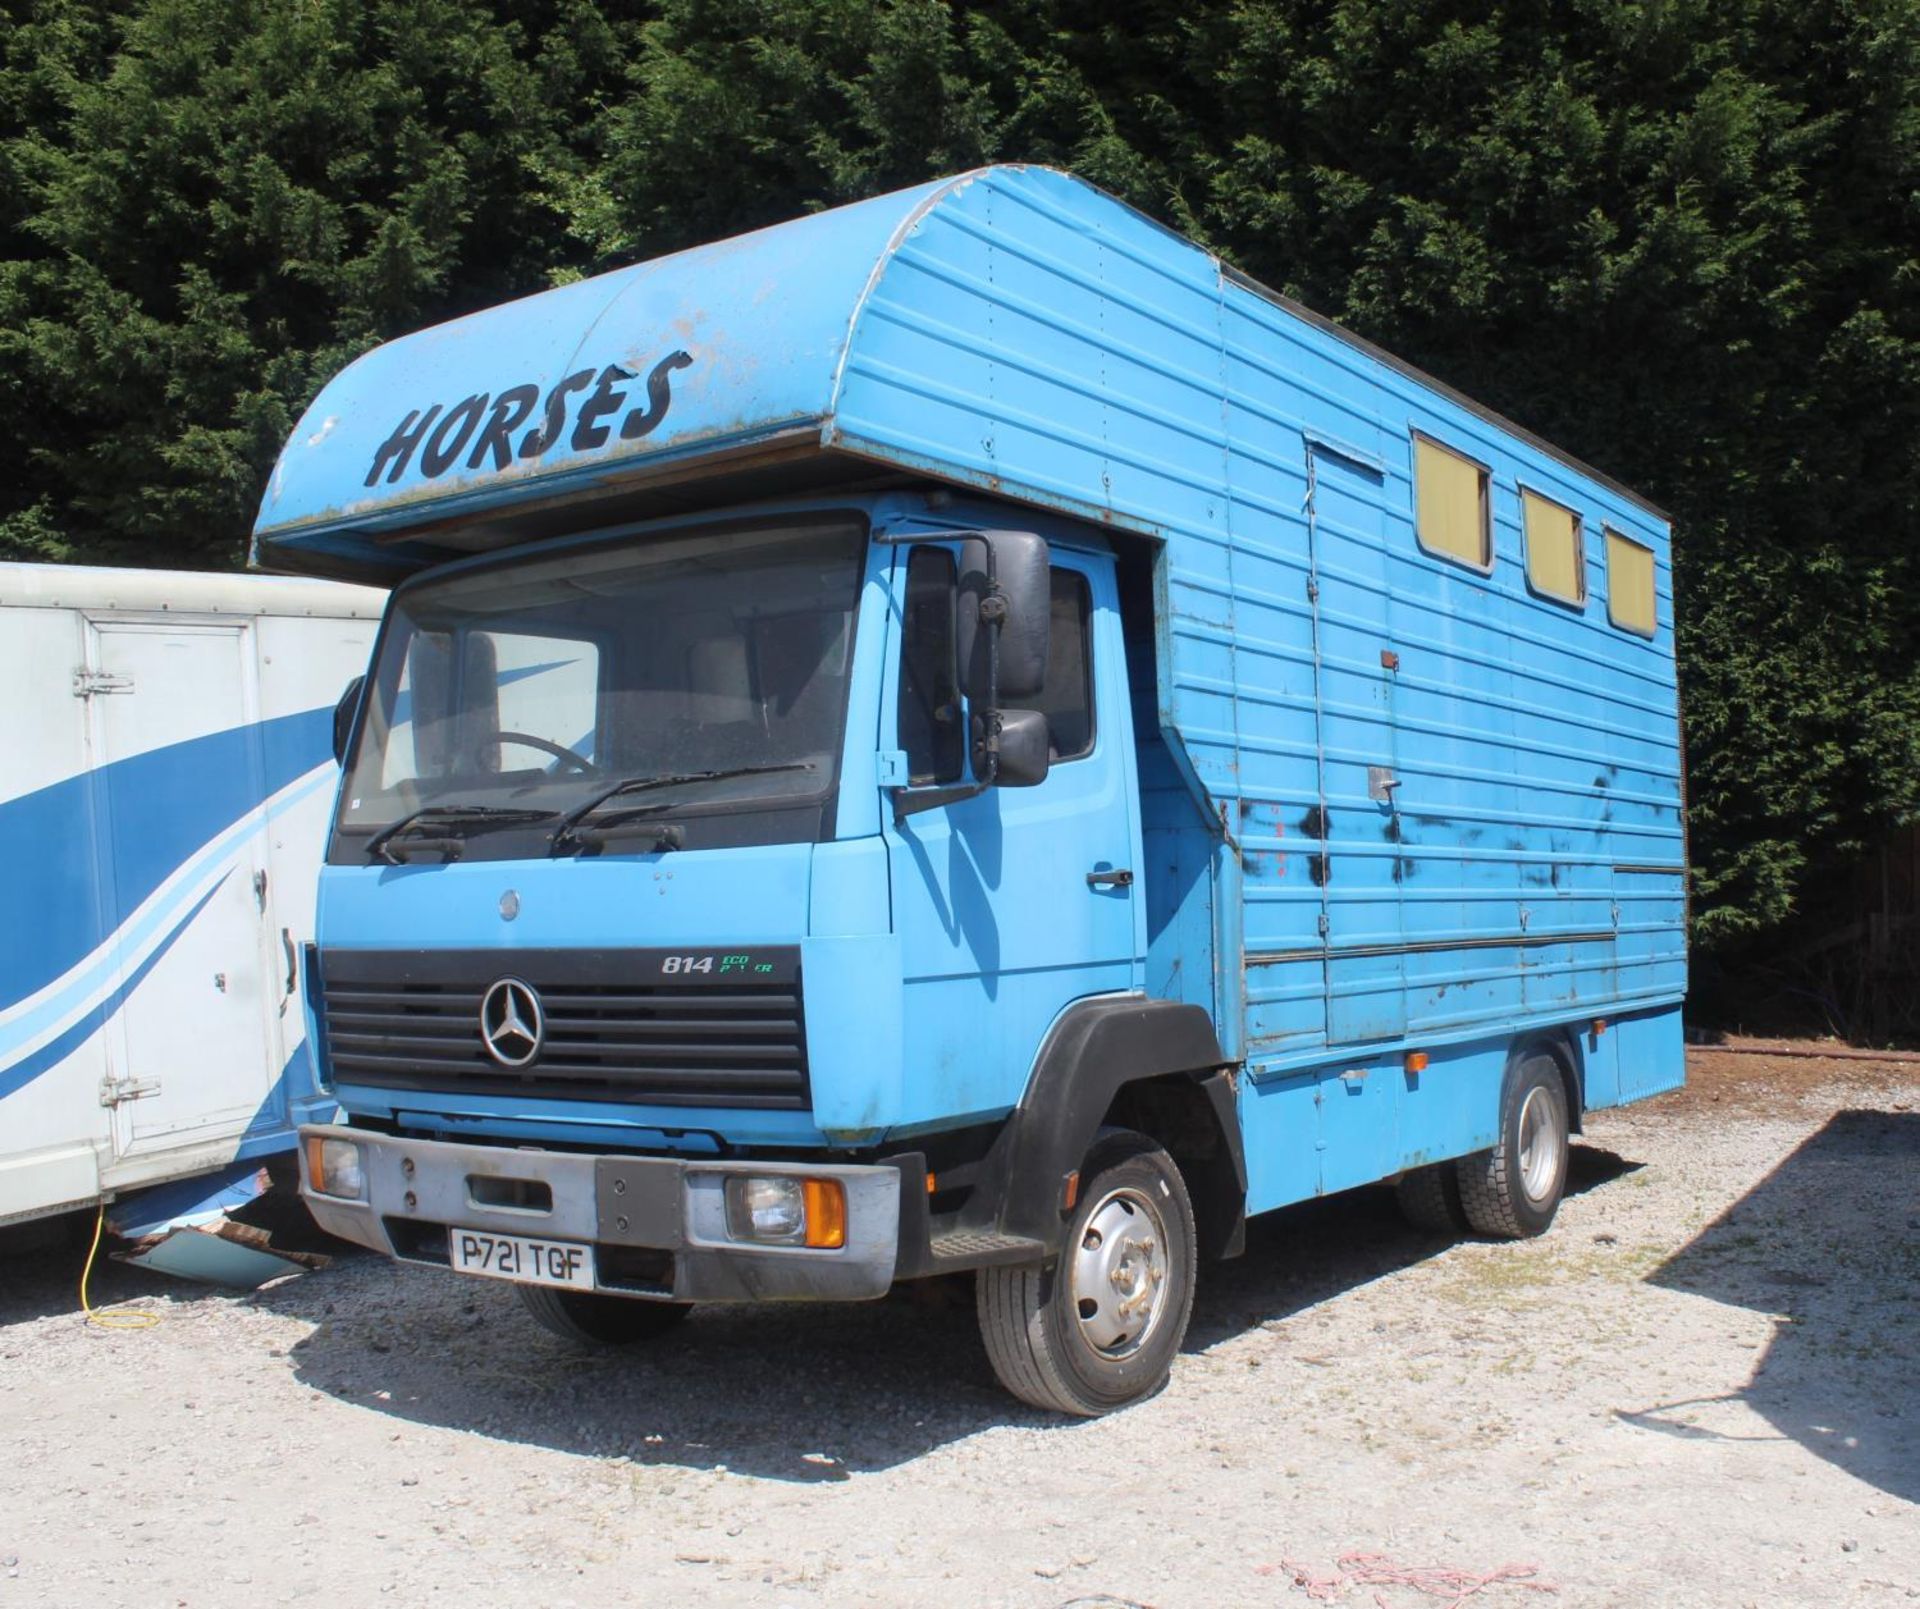 A MERCEDES BENZ 814 ECO POWER DIESEL FOUR HORSE BOX WITH LIVING- REGISTRATION P721TGF, VENDOR HAS - Image 2 of 2